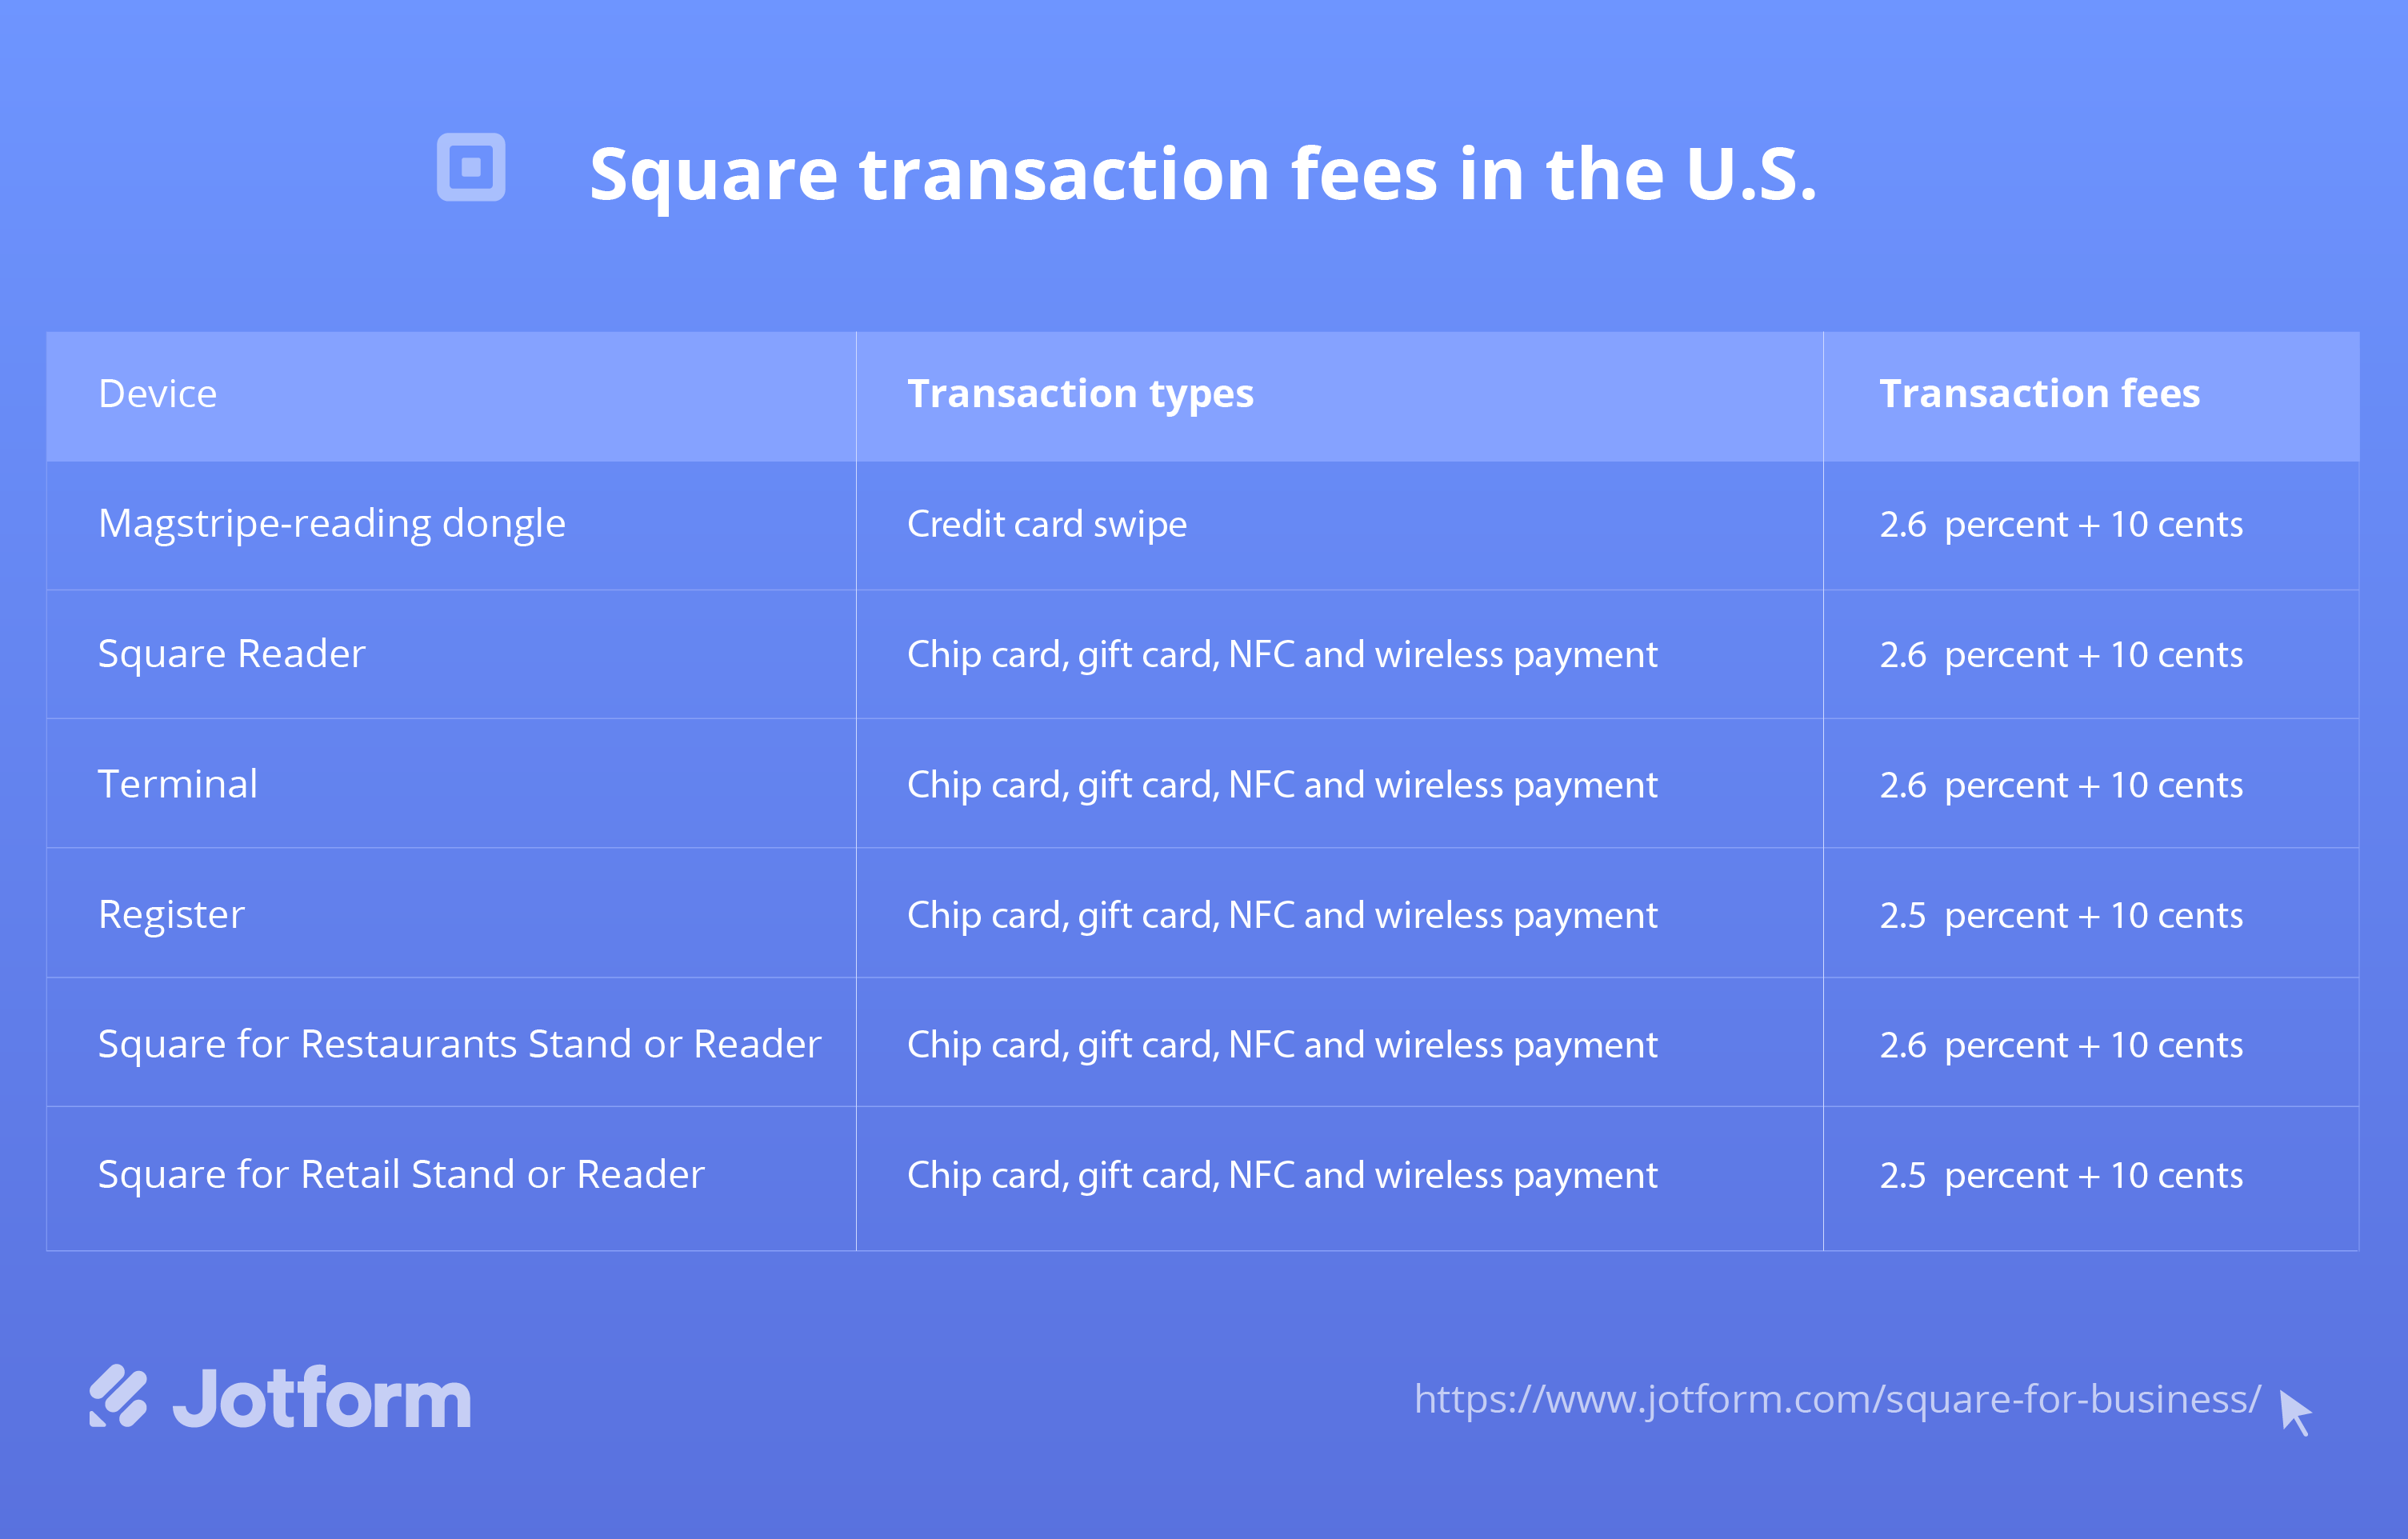 Table of Square transaction fees in the U.S